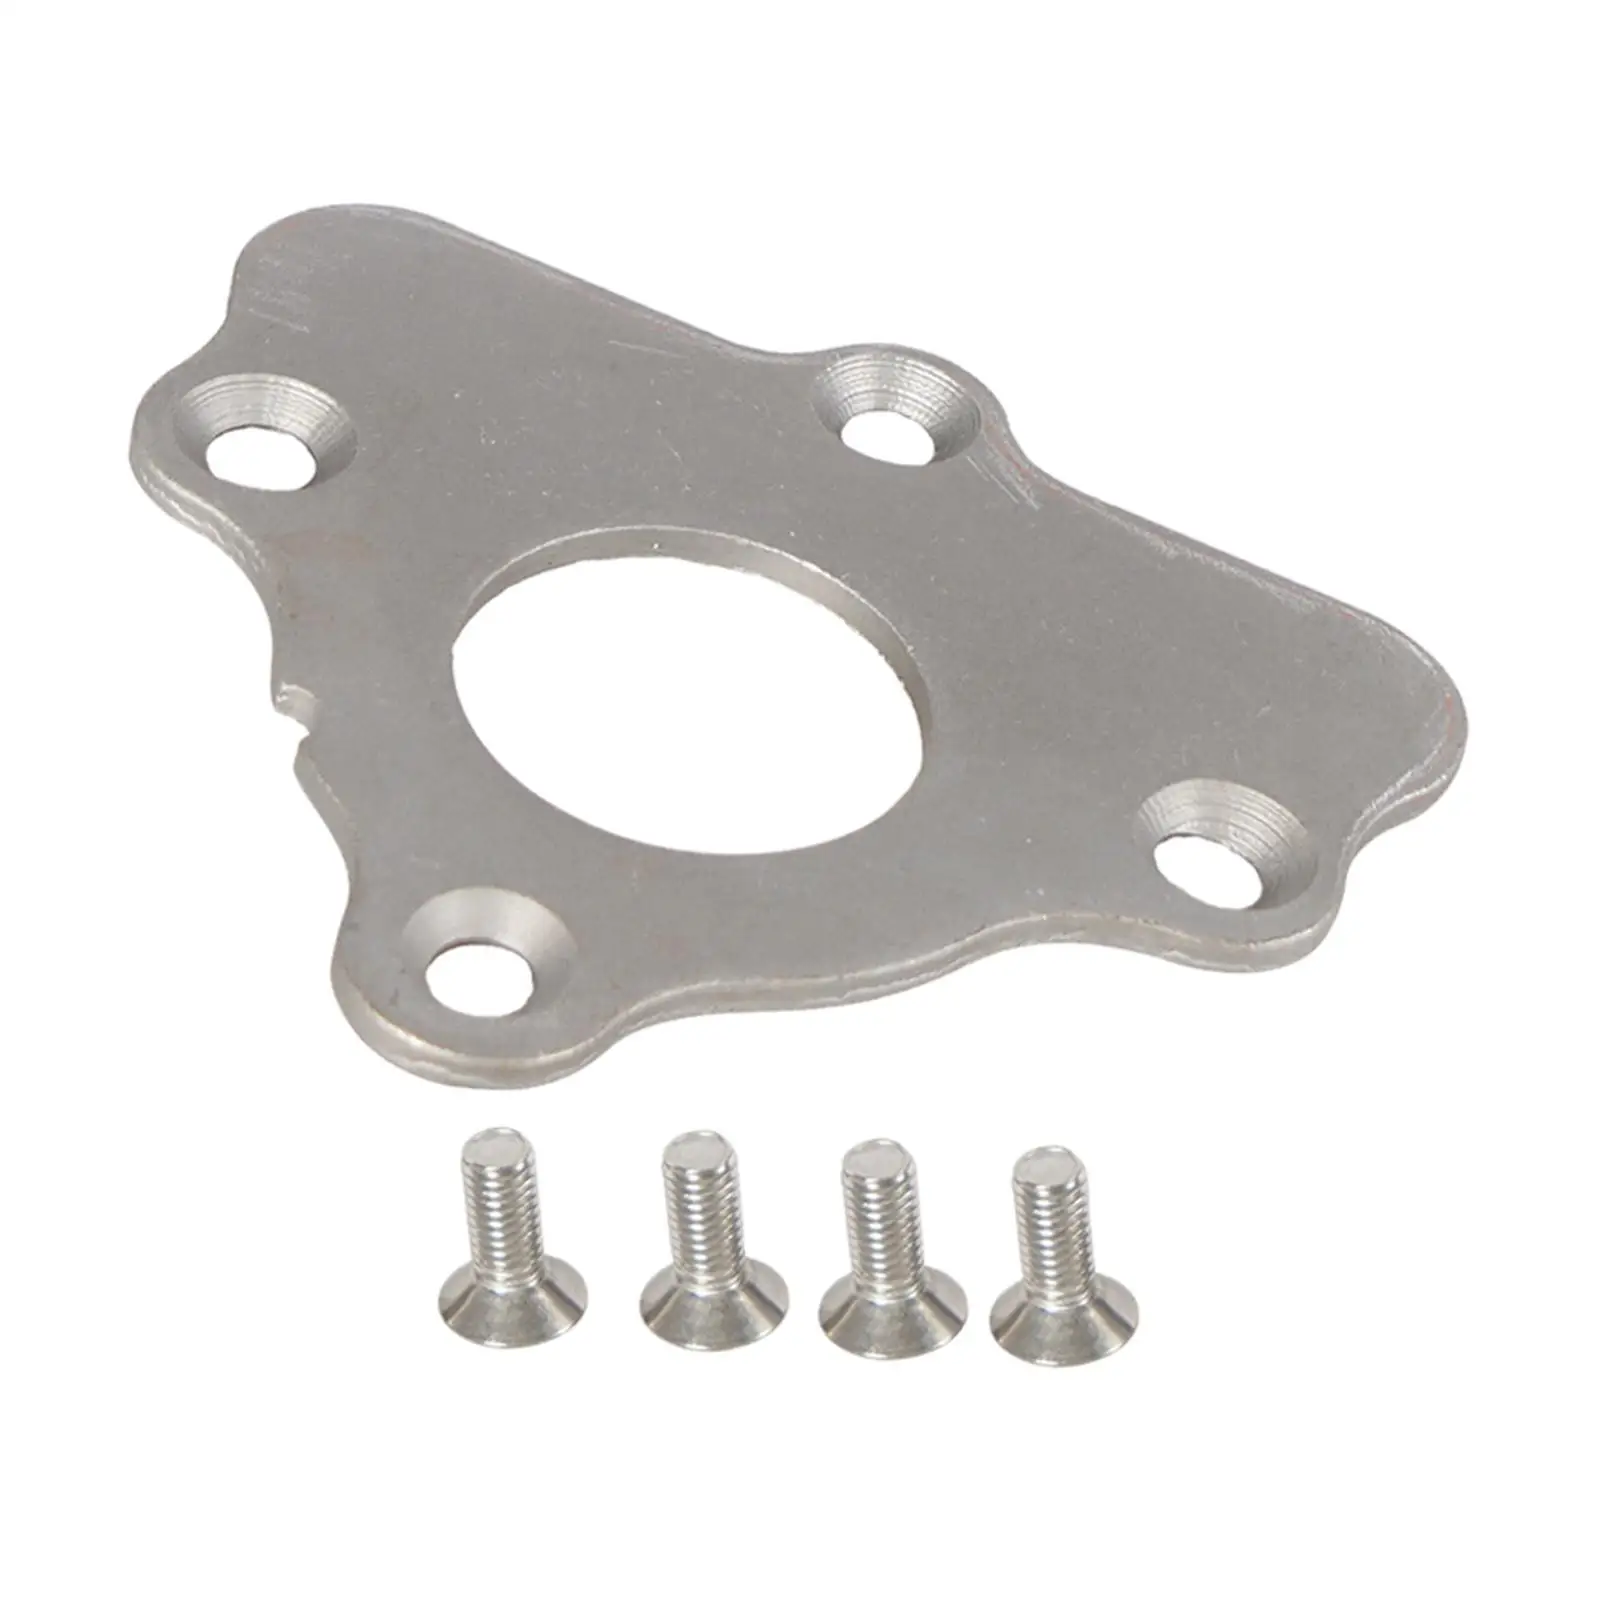 Camshaft Thrust Retainer Plate Fits for LS Series Engines High Performance